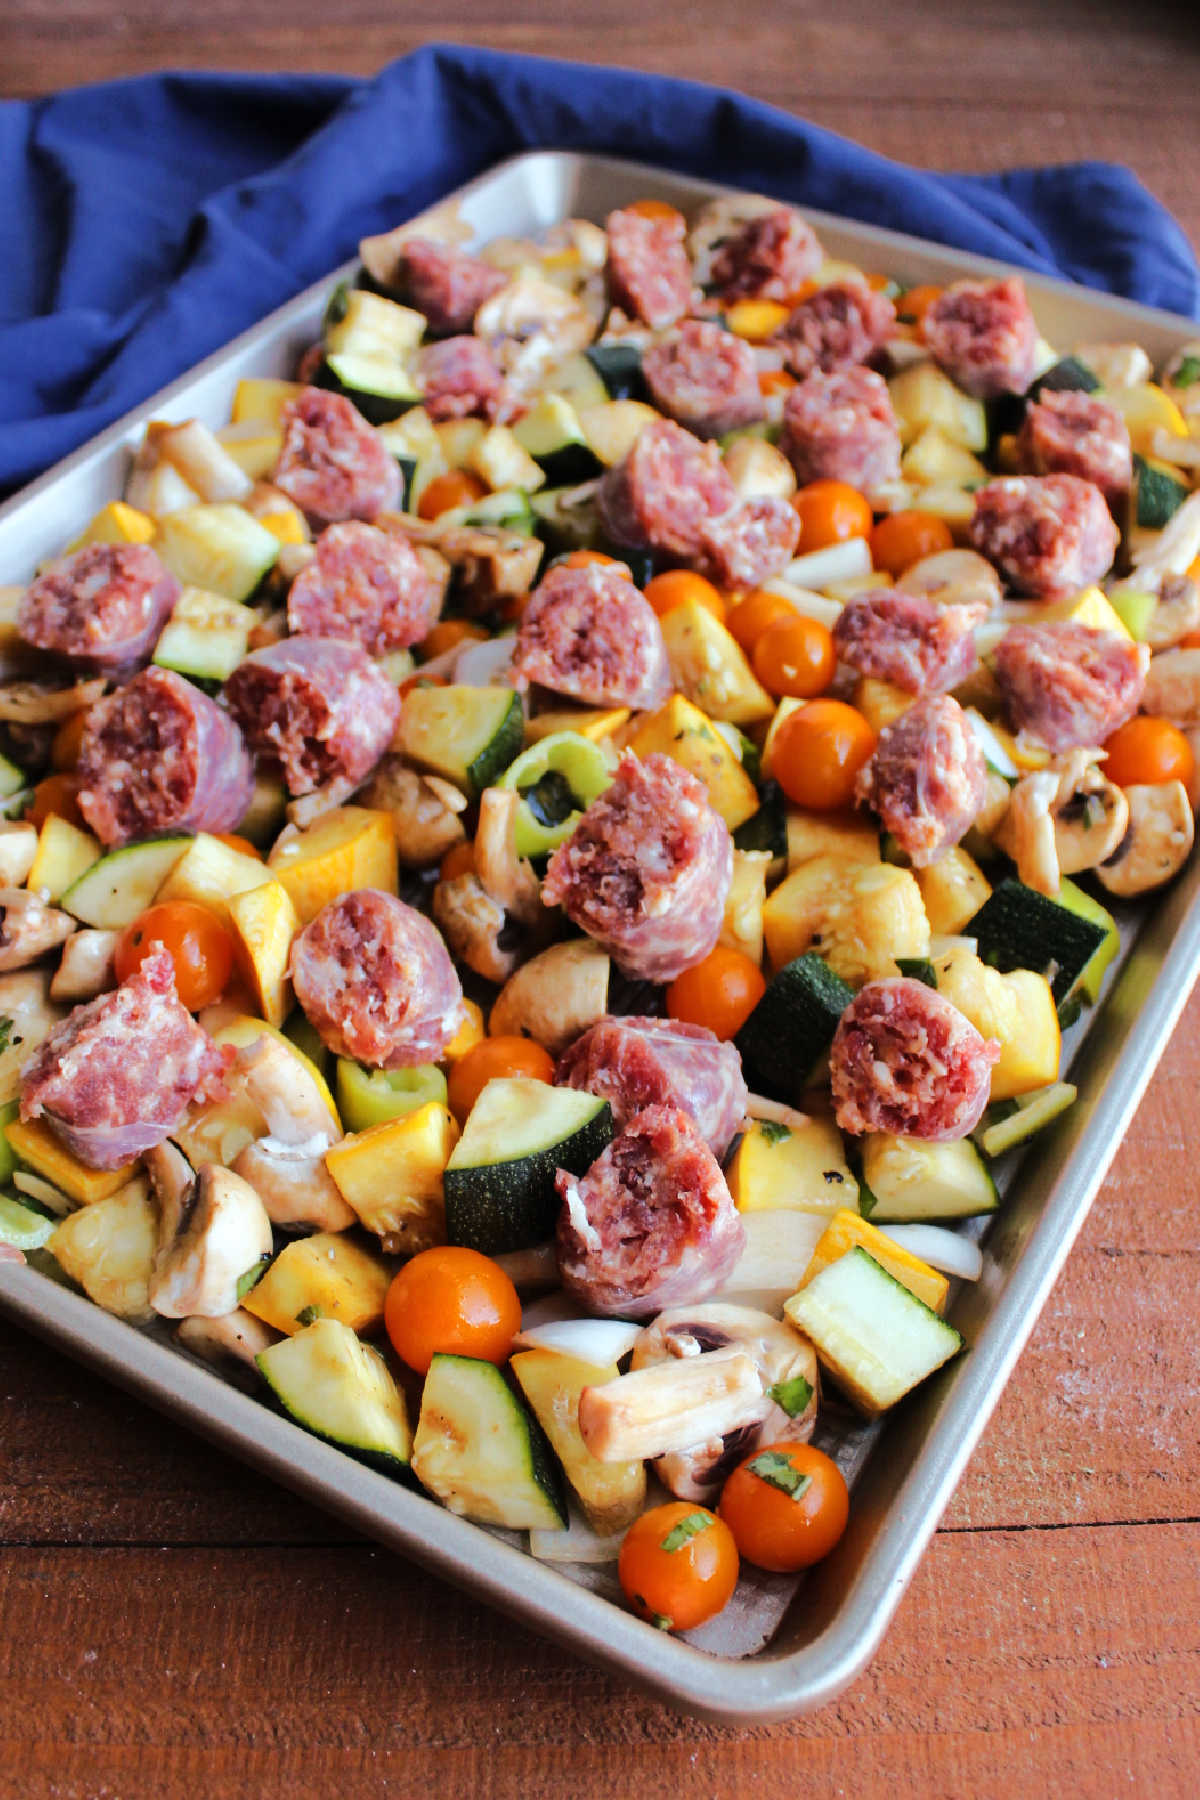 Vegetables on rimmed sheet pan topped with pieces of raw Italian sausage links, ready to be roasted.